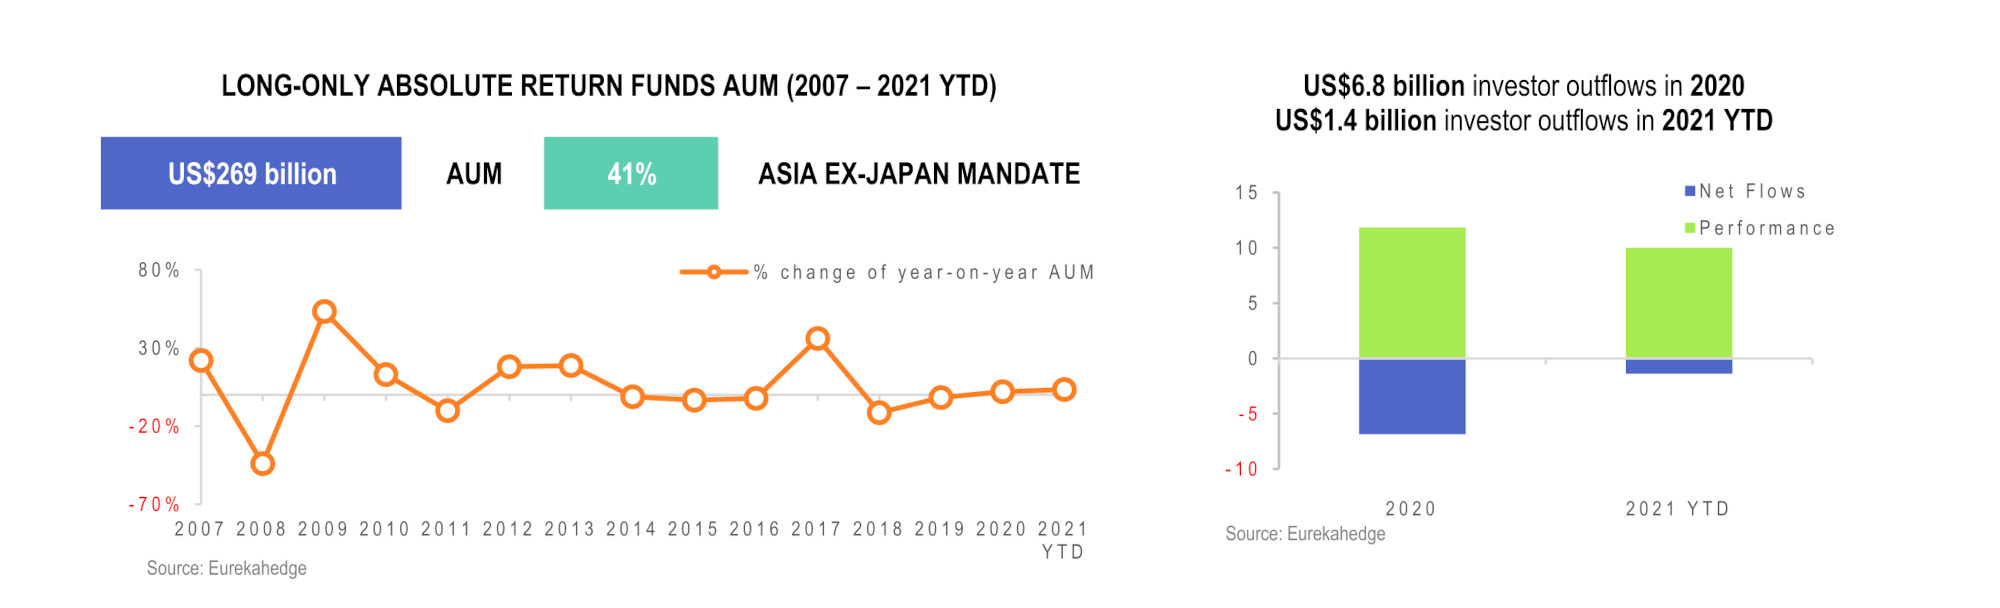 Long-only absolute return Funds Infographic Dec 2021 - AUM